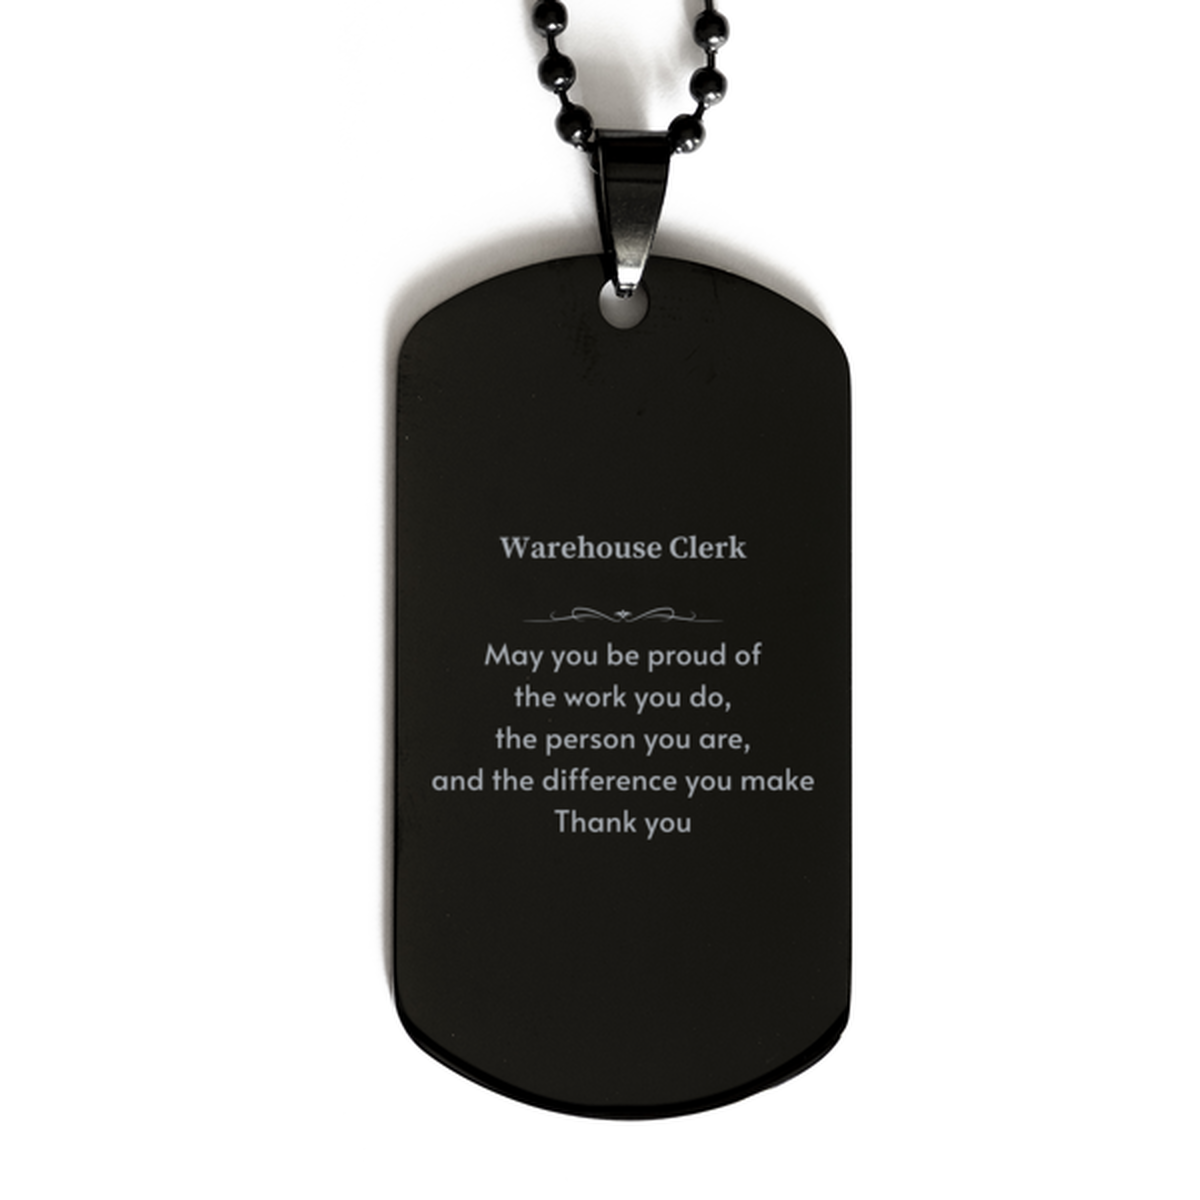 Heartwarming Black Dog Tag Retirement Coworkers Gifts for Warehouse Clerk, Warehouse Clerk May You be proud of the work you do, the person you are Gifts for Boss Men Women Friends